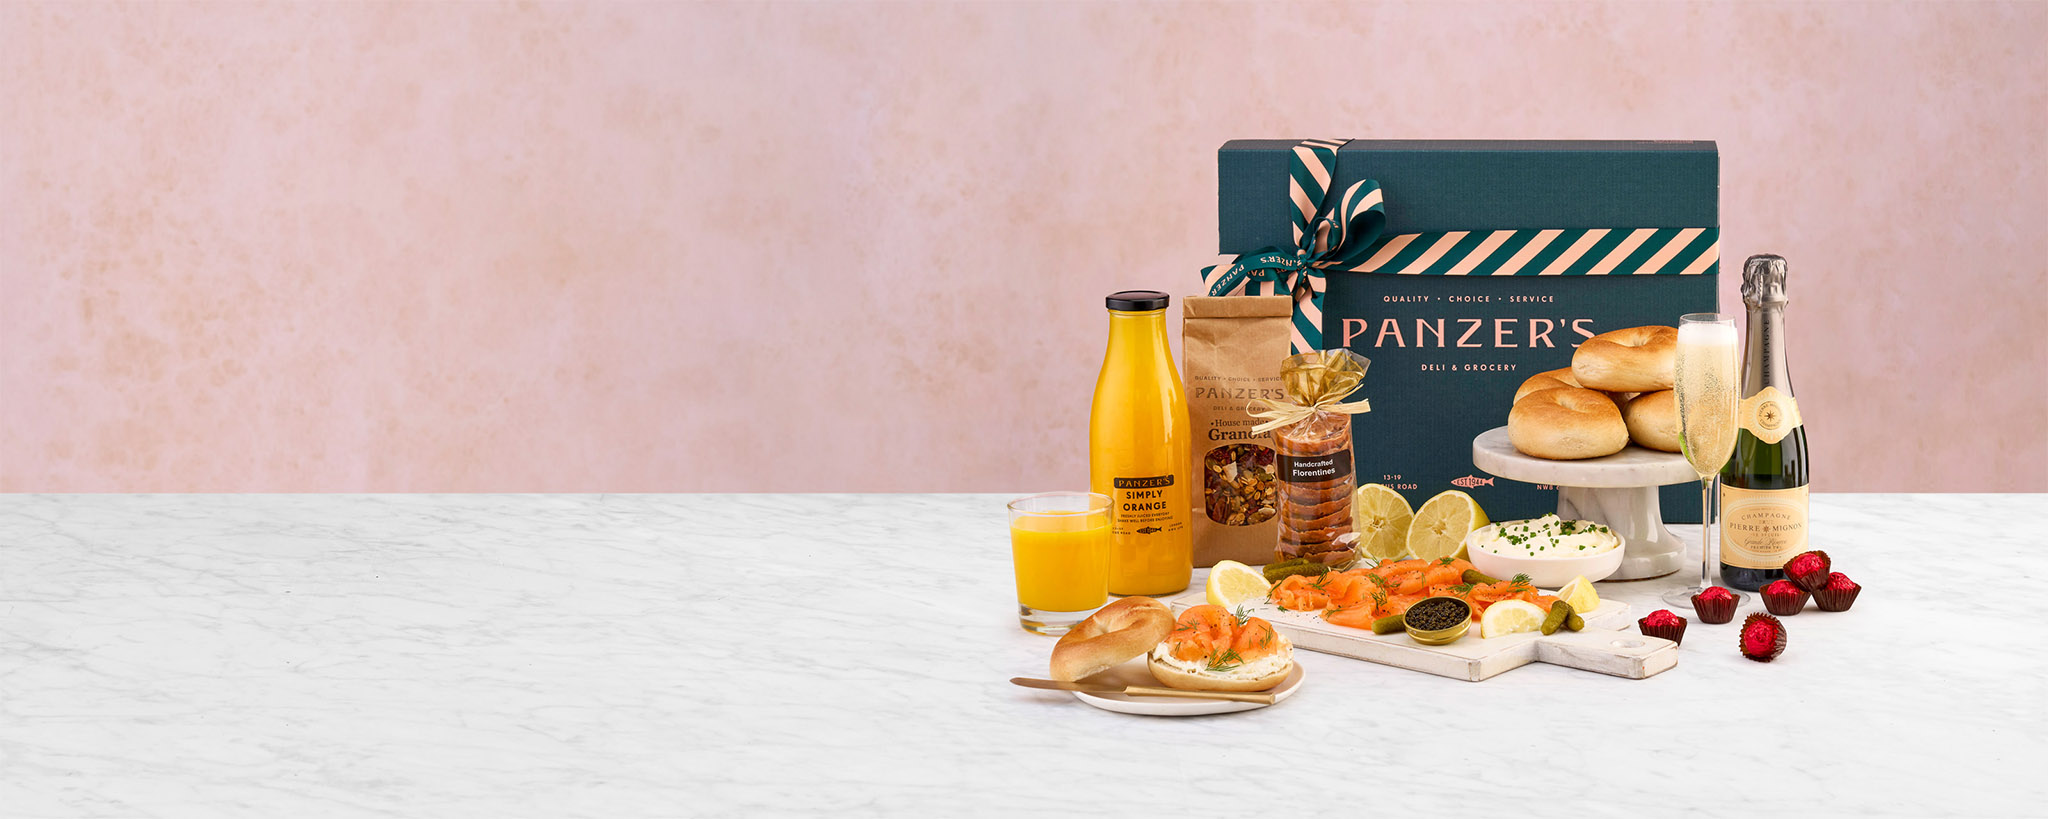 Panzer's Ultimate Breakfast Box with smoked salmon bagels, granola, champagne and more.